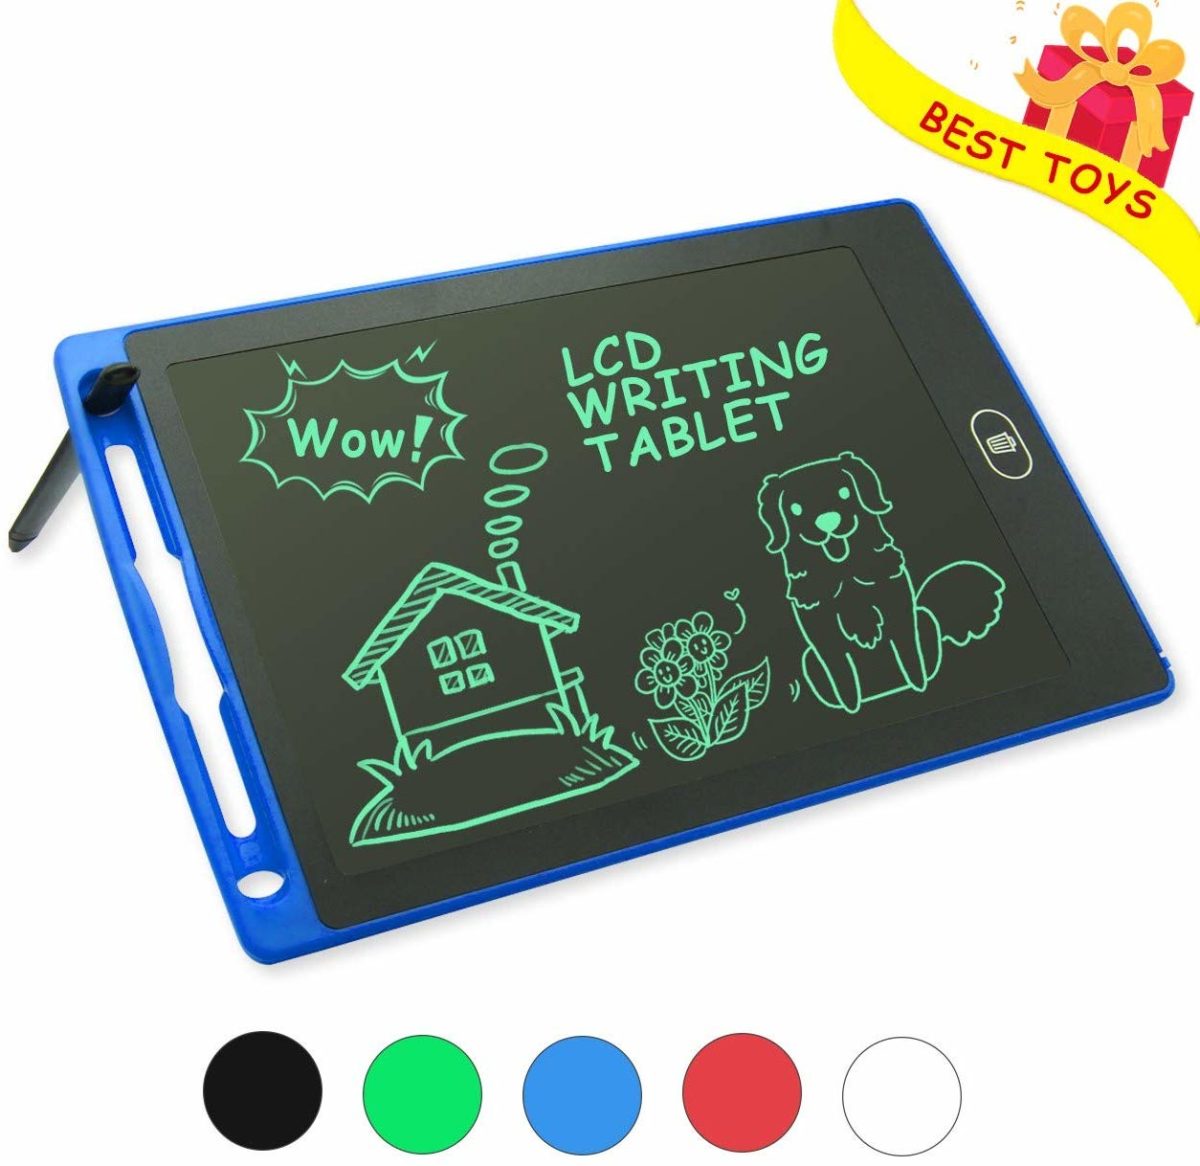 Matesy Reusable Drawing Toys LCD Writing Tablet - Top Toys and Gifts for Six Year Old Boys 1